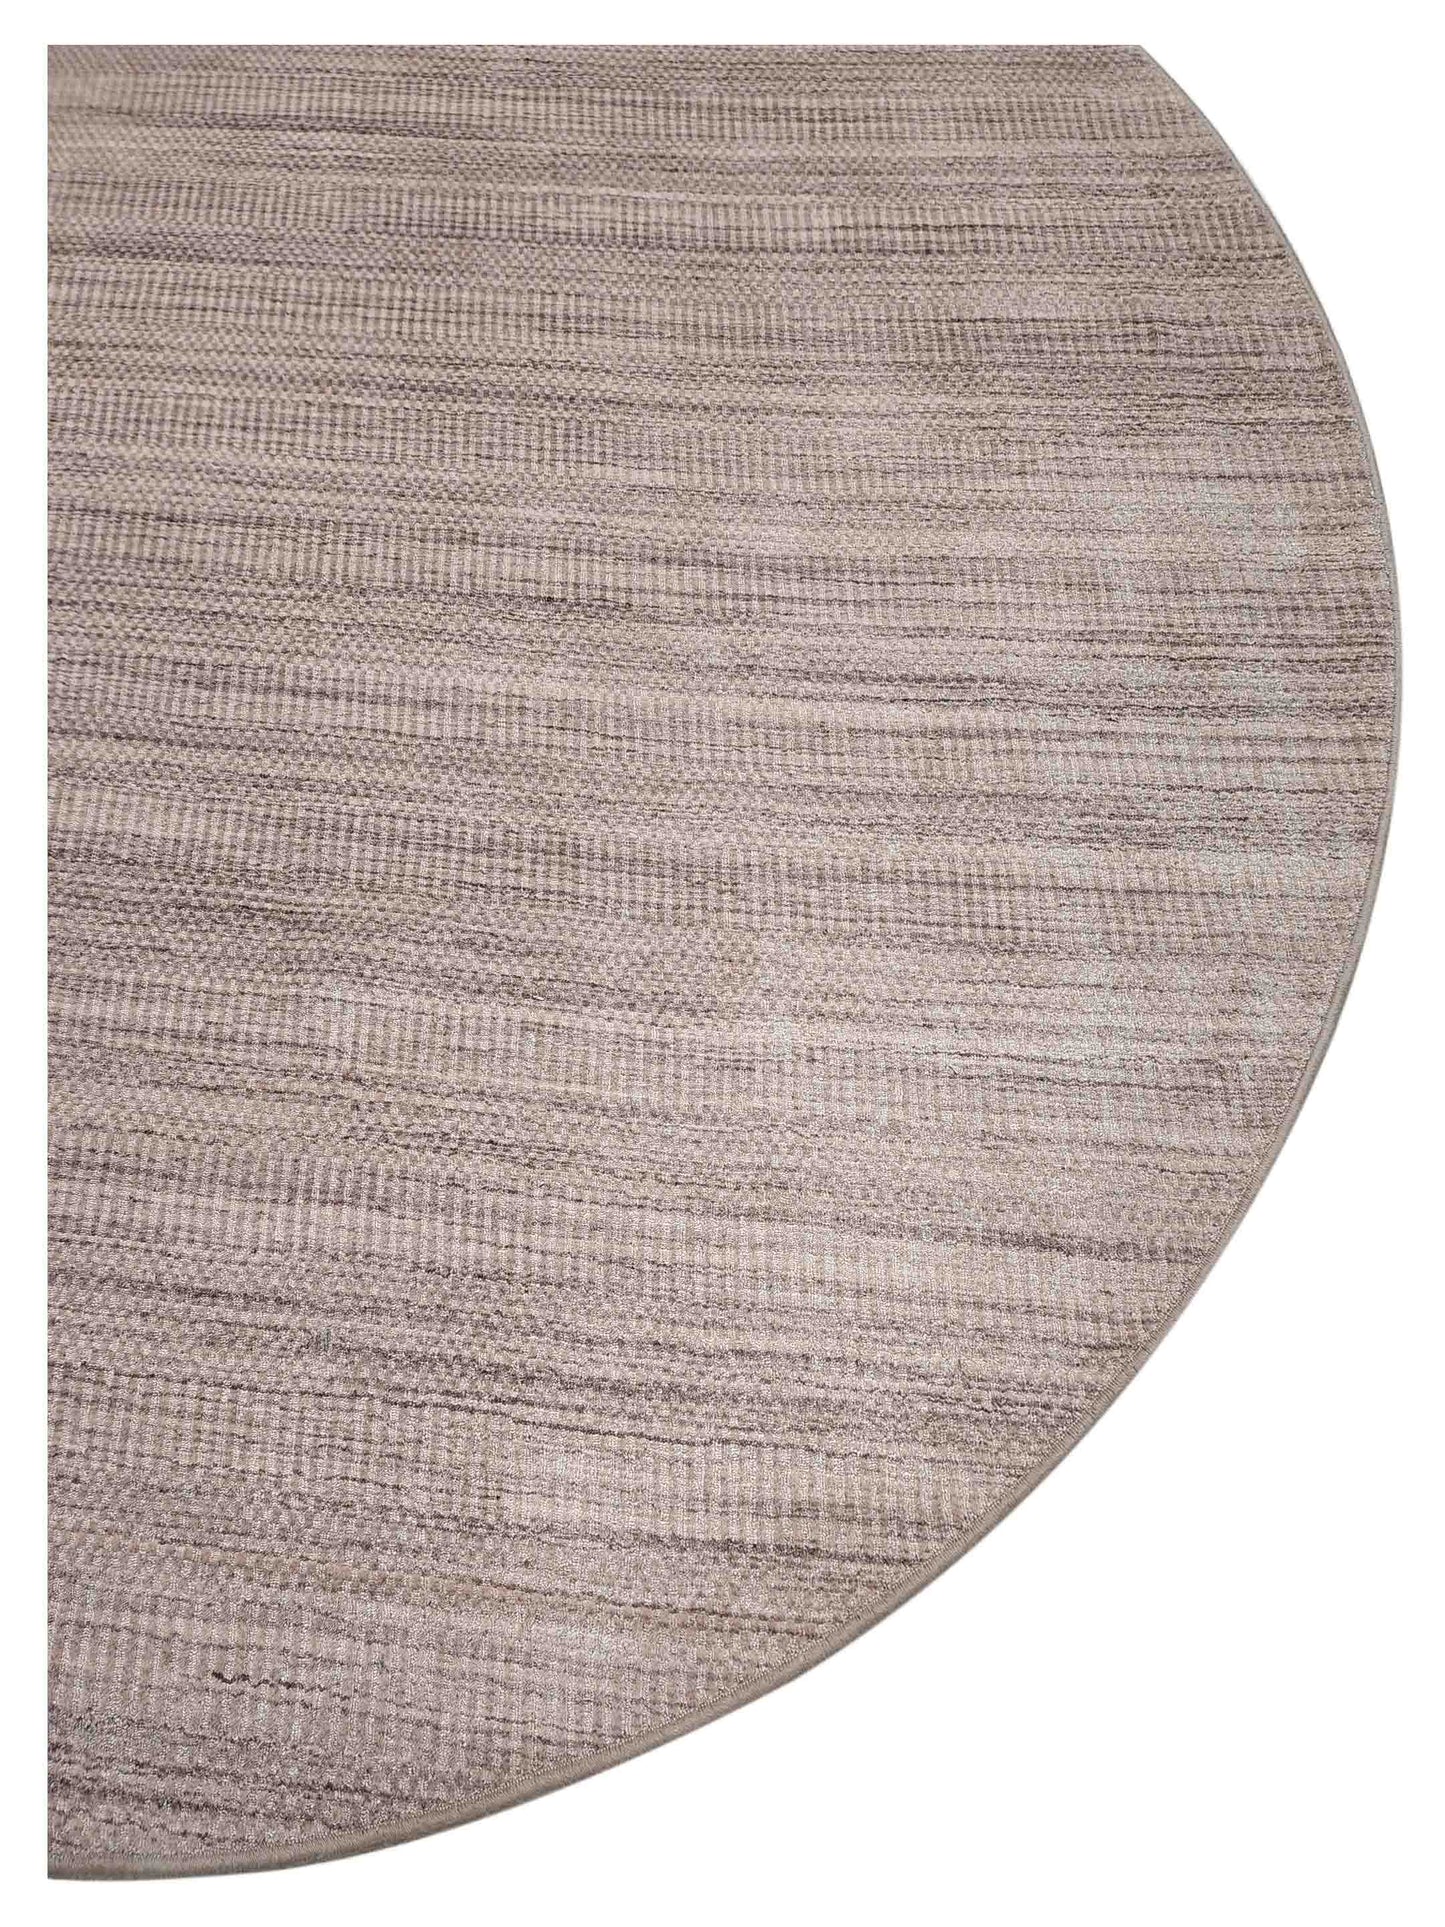 Artisan Heather  French Rose  Transitional Loom Rug